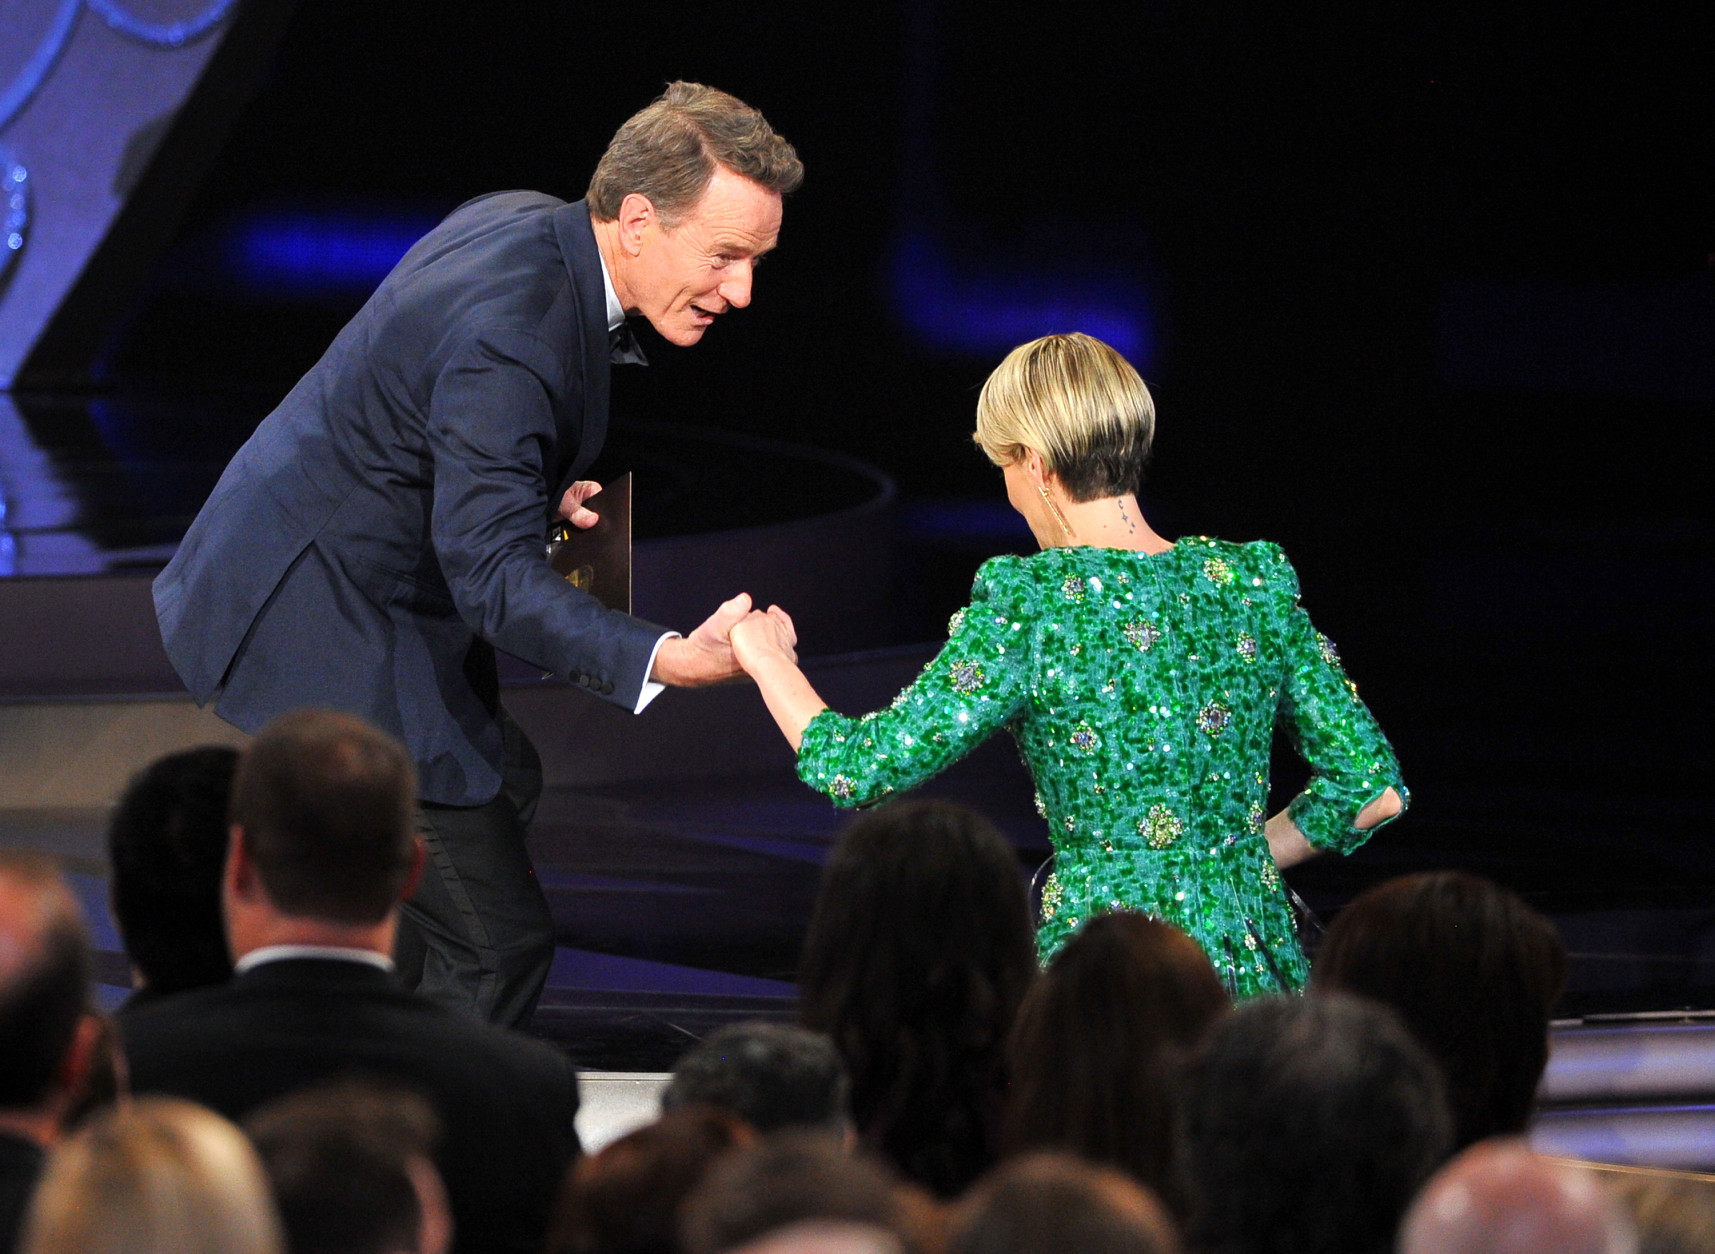 Bryan Cranston, left, presents the award to Sarah Paulson for outstanding lead actress in a limited series or a movie for The People v. O.J. Simpson: American Crime Story at the 68th Primetime Emmy Awards on Sunday, Sept. 18, 2016, at the Microsoft Theater in Los Angeles. (Photo by Vince Bucci/Invision for the Television Academy/AP Images)